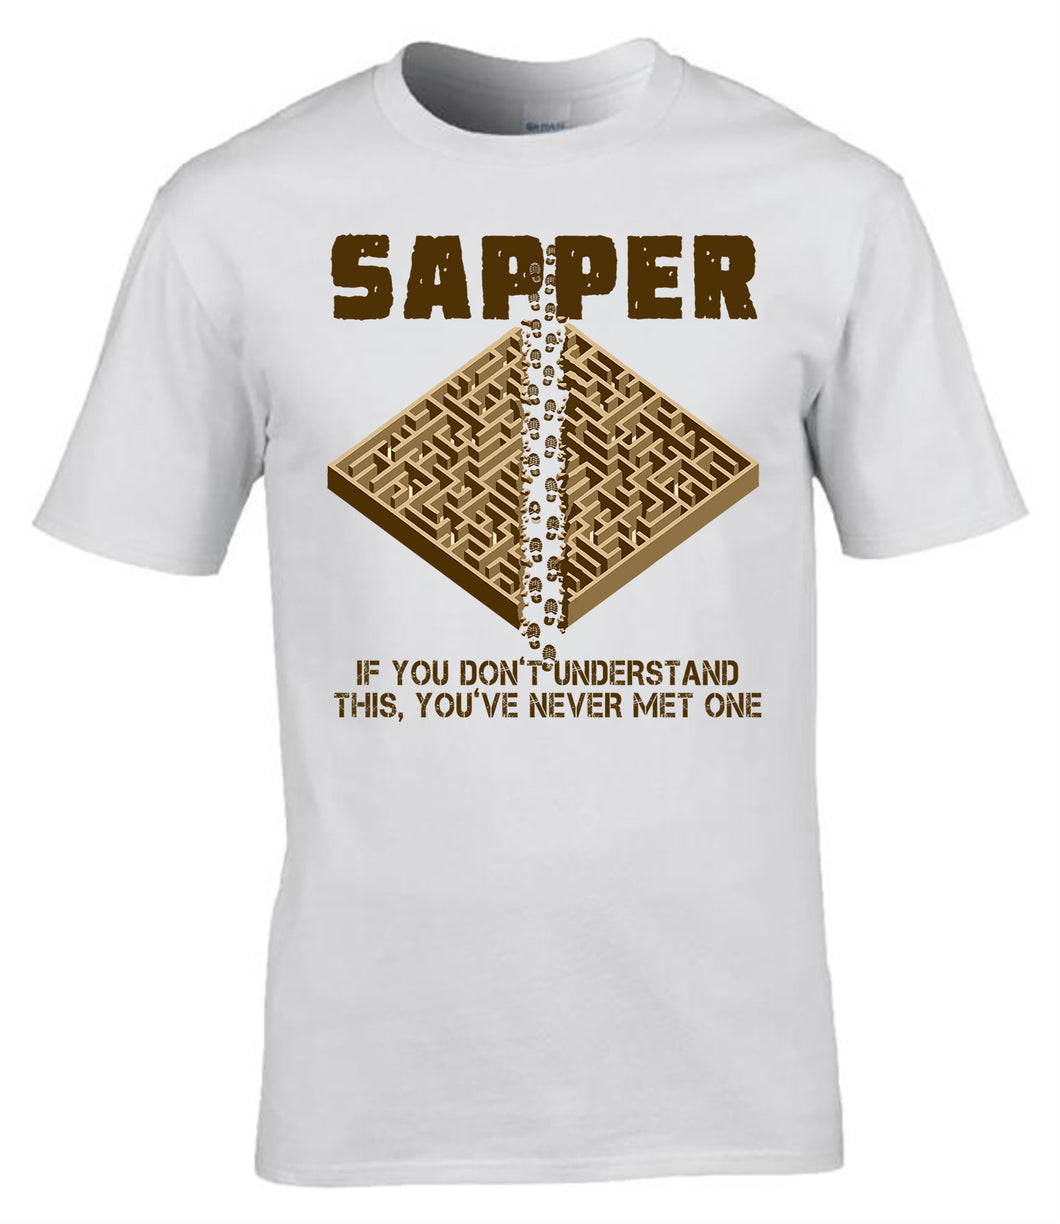 Military Humor - Sapper - Takes one to know one.